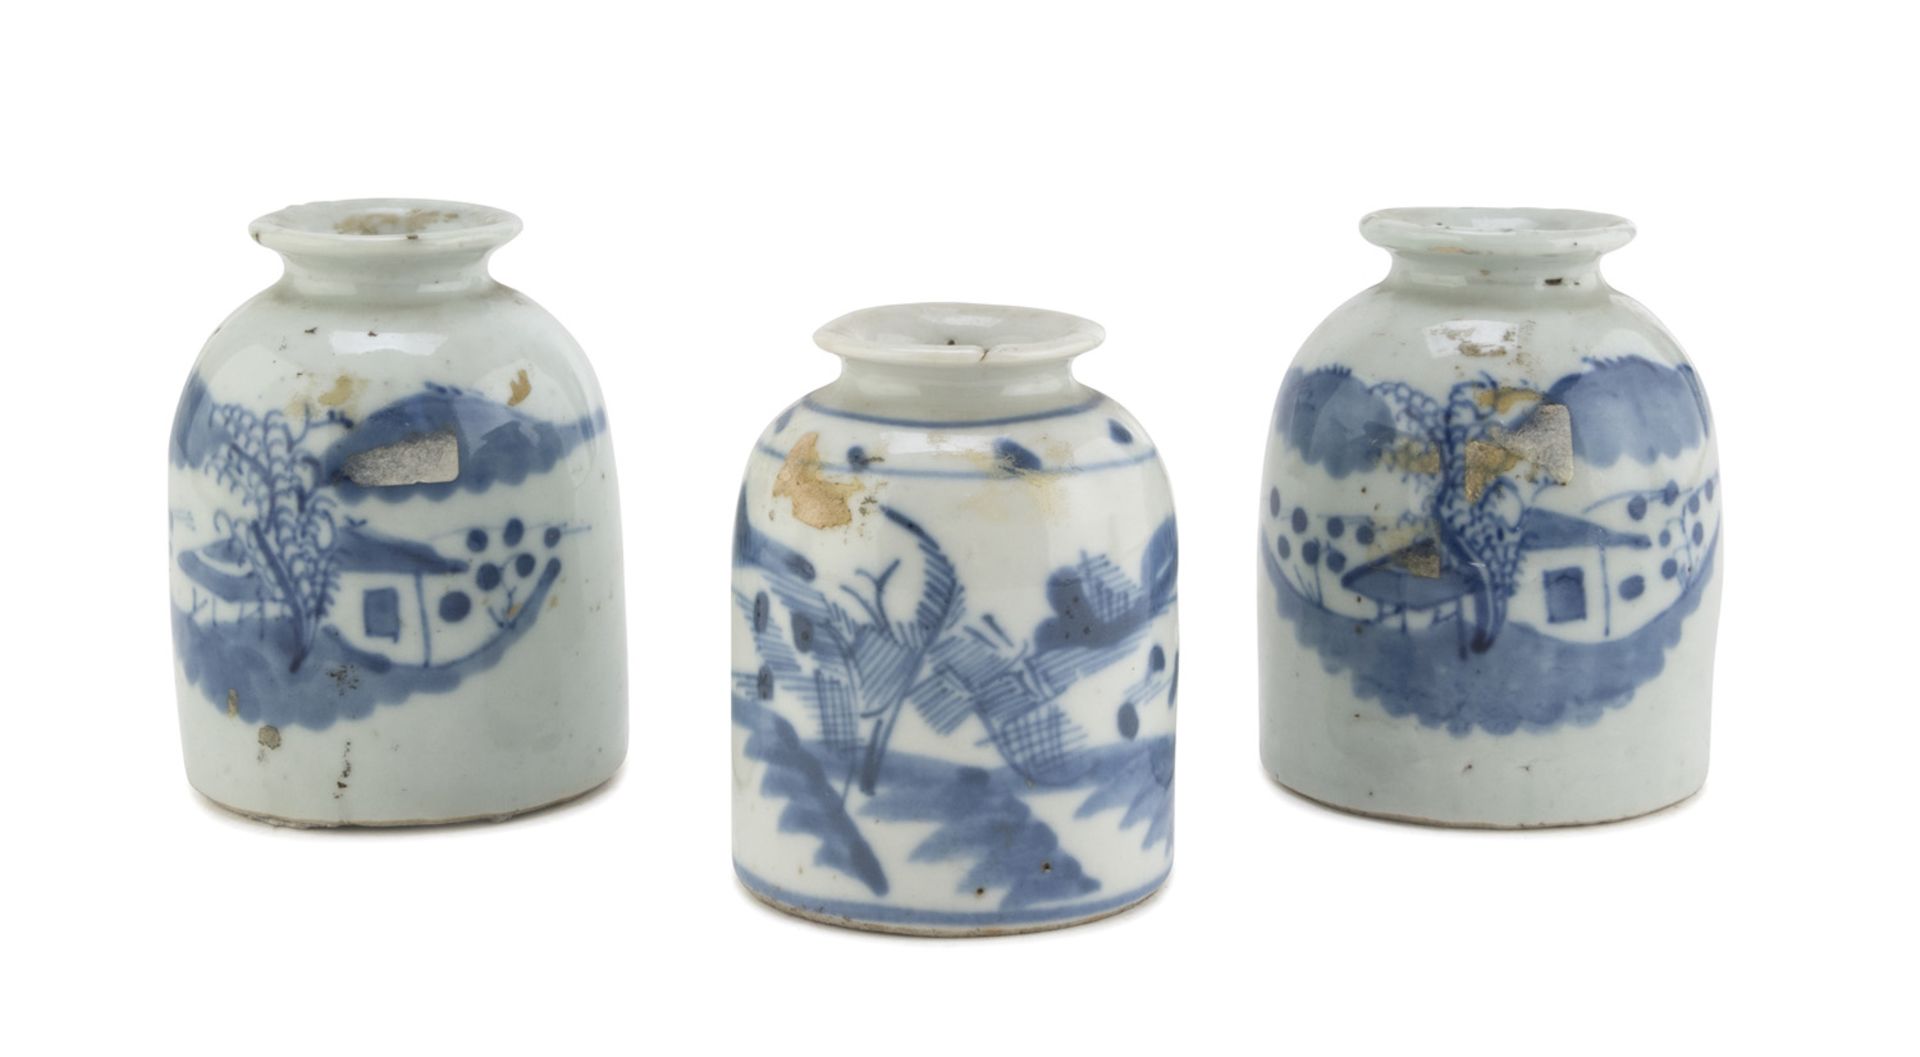 THREE SMALL JARS IN WHITE AND BLUE PORCELAIN CHINA LATE 19th EARLY 20th CENTURY